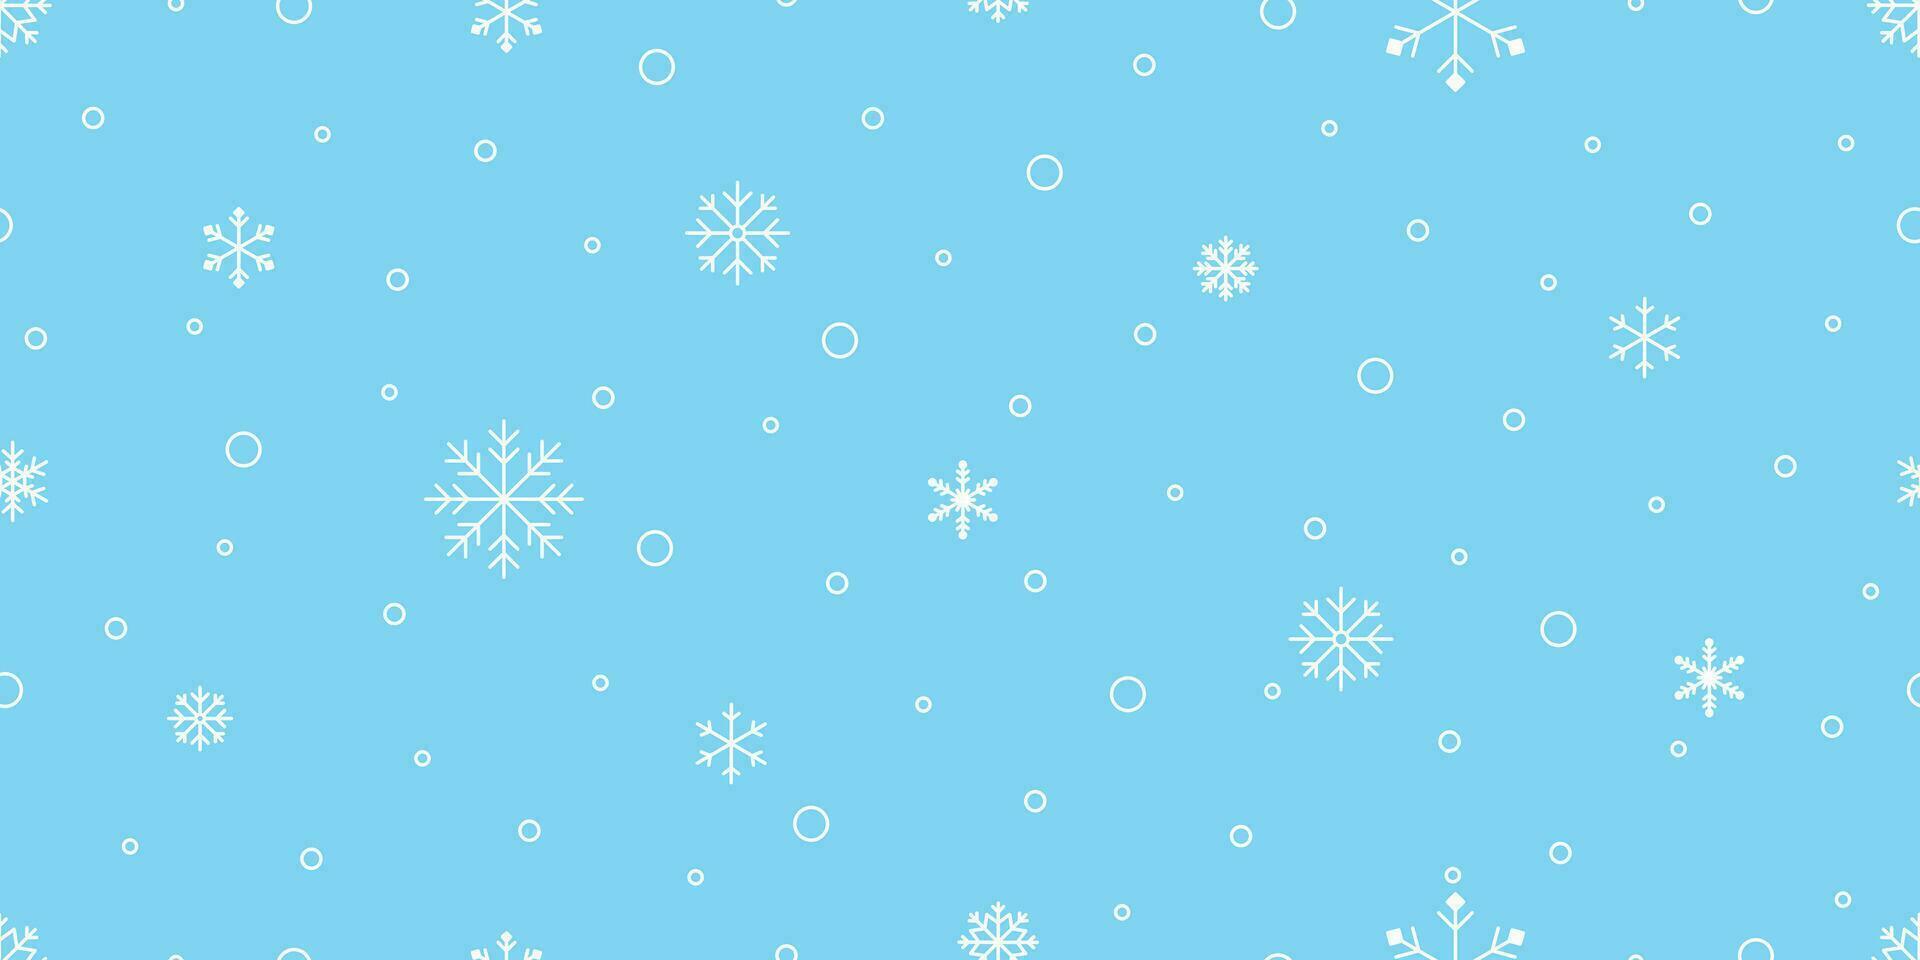 Snowflake seamless pattern Christmas vector snow Xmas Santa Claus scarf isolated repeat wallpaper tile background illustration gift wrapping paper design